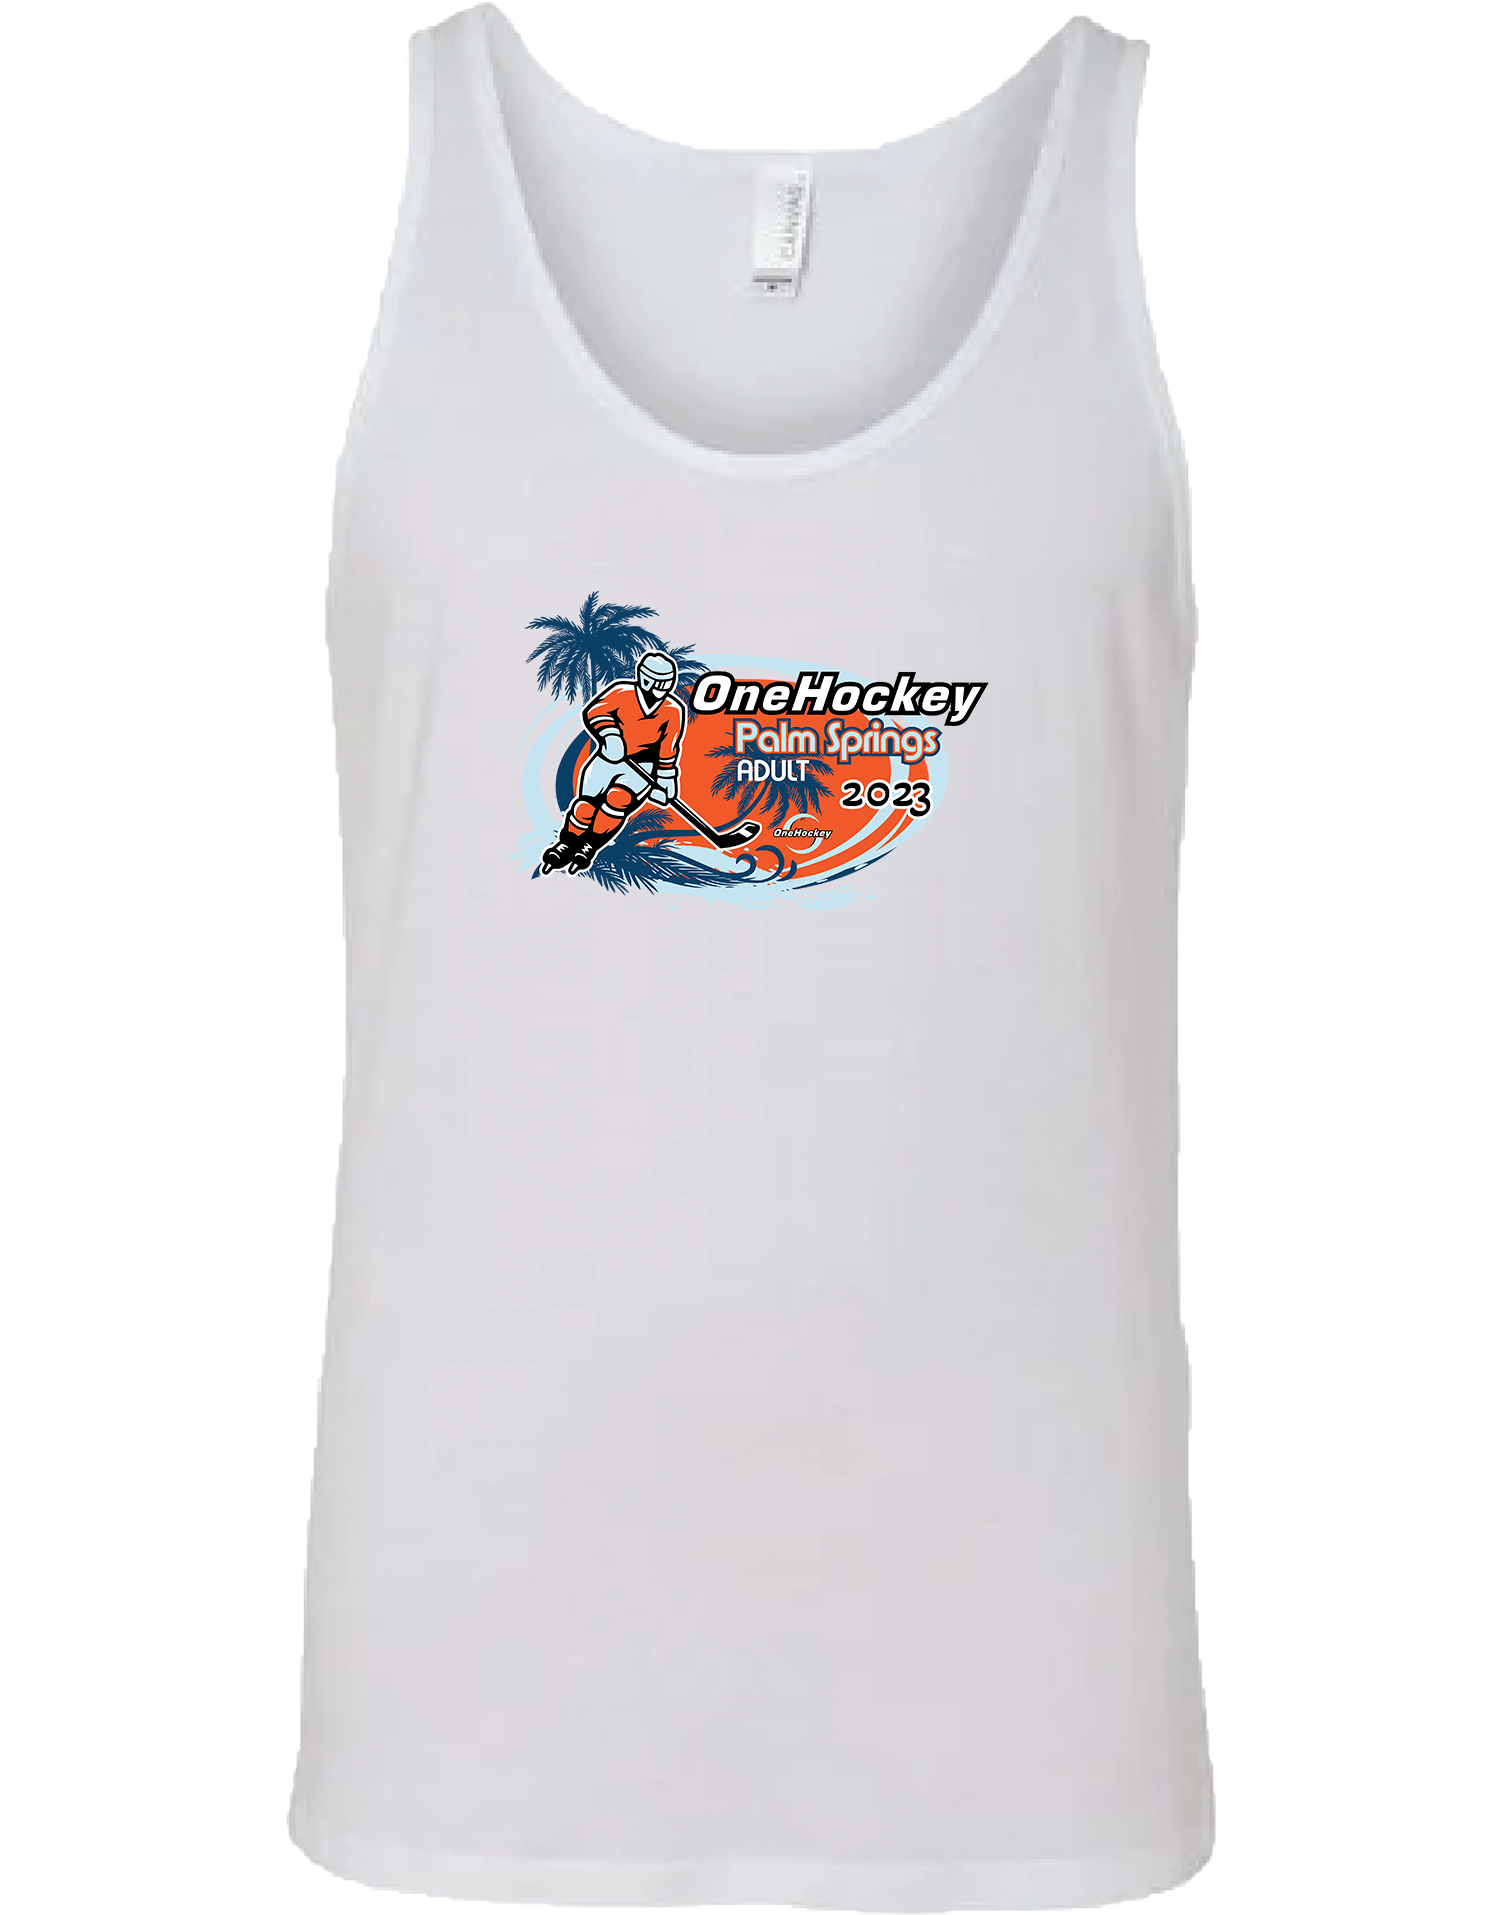 TANK TOP - 2023 OneHockey Palm Springs Adult